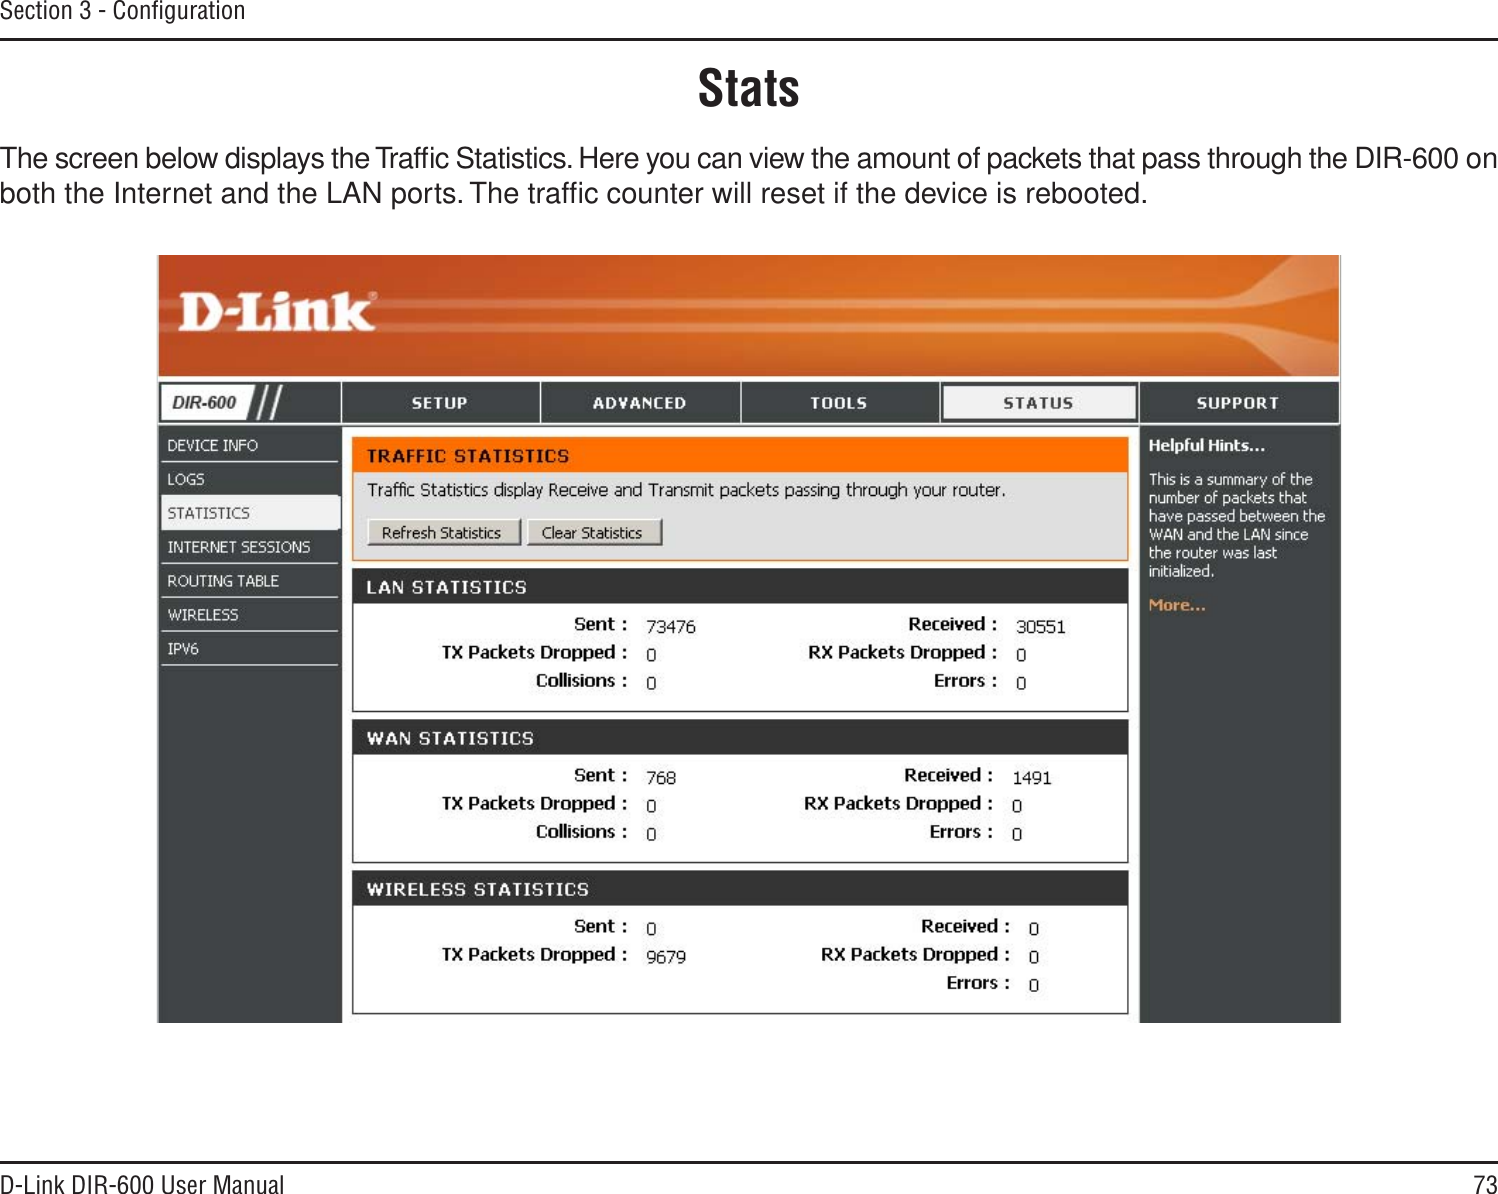 73D-Link DIR-600 User ManualSection 3 - ConﬁgurationStatsThe screen below displays the Trafﬁc Statistics. Here you can view the amount of packets that pass through the DIR-600 on both the Internet and the LAN ports. The trafﬁc counter will reset if the device is rebooted.